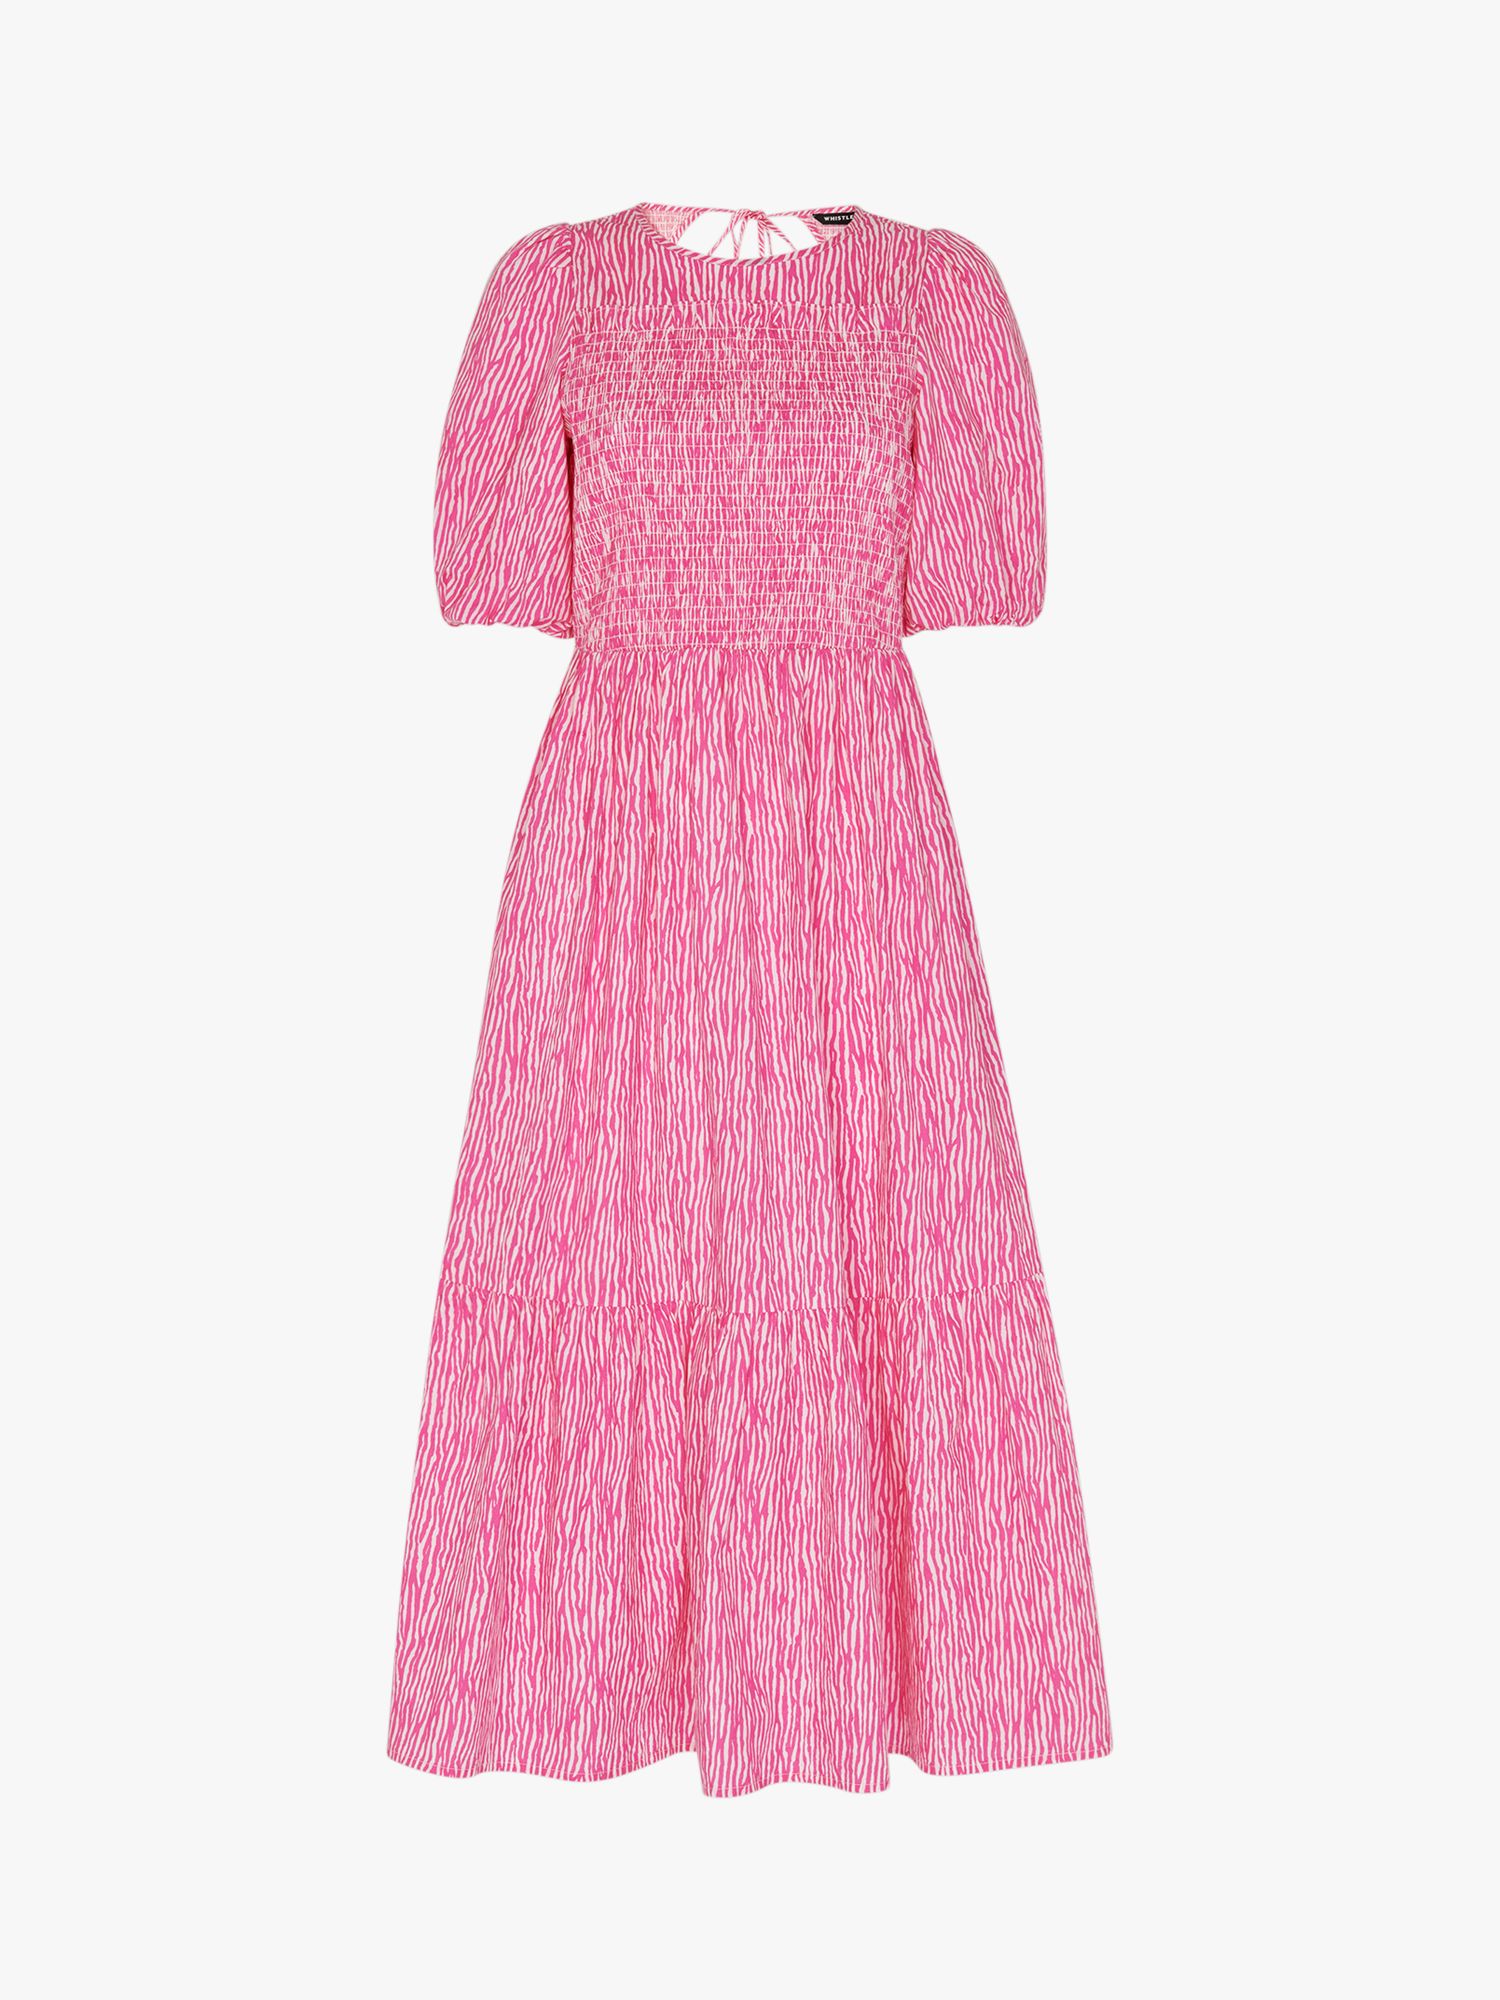 Whistles Uneven Lines Midi Dress, Pink at John Lewis & Partners